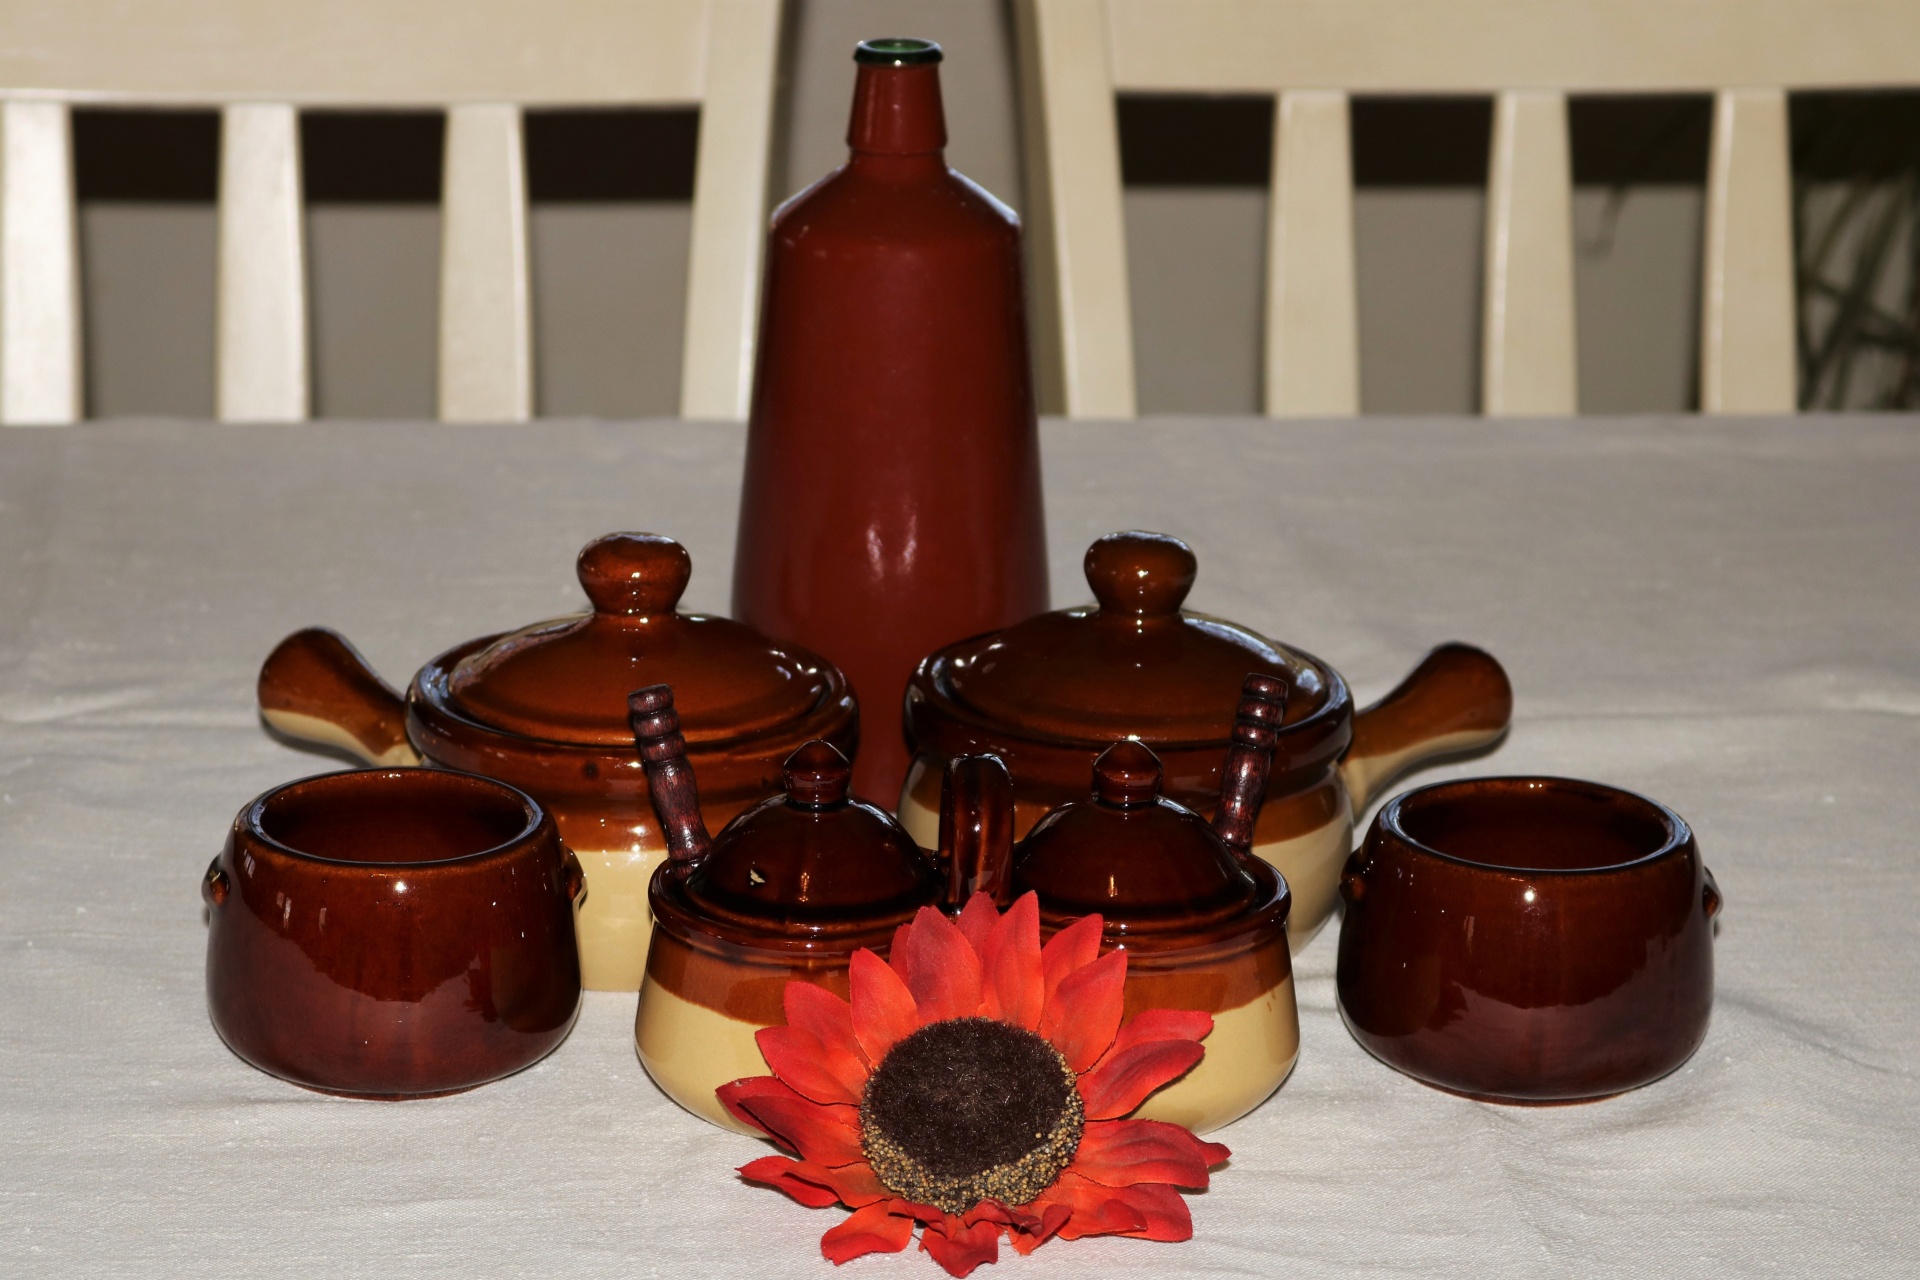 Brown glazed vintage stone ware bowls, bean pots and condiment servers, on a white table with vintage wine bottle.